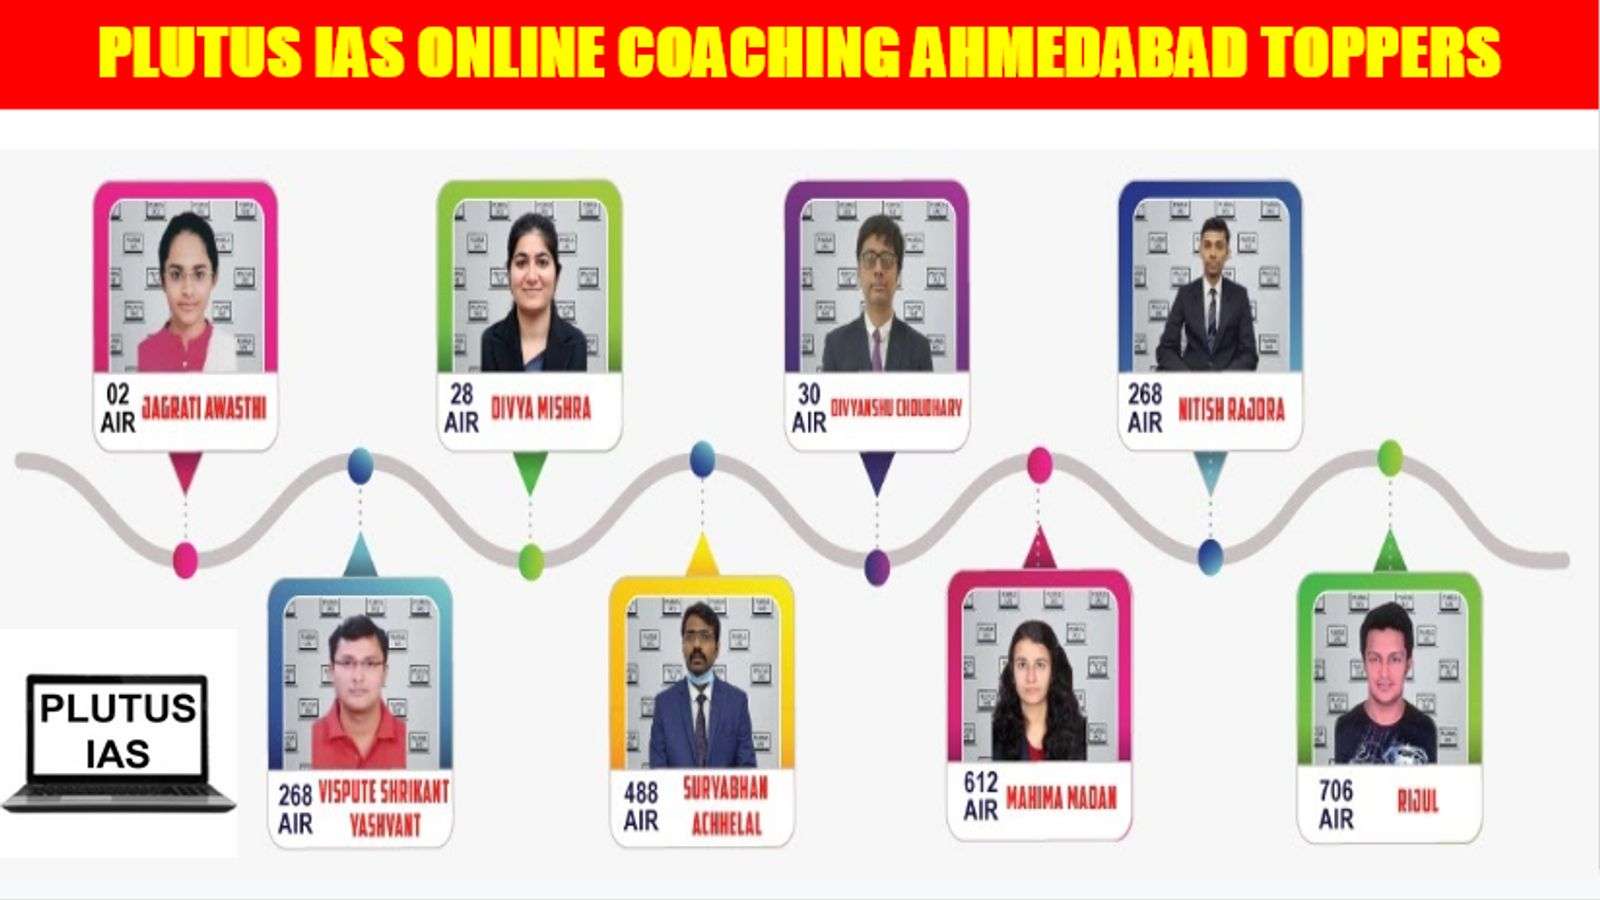 Plutus IAS Online Coaching Ahmedabad Toppers